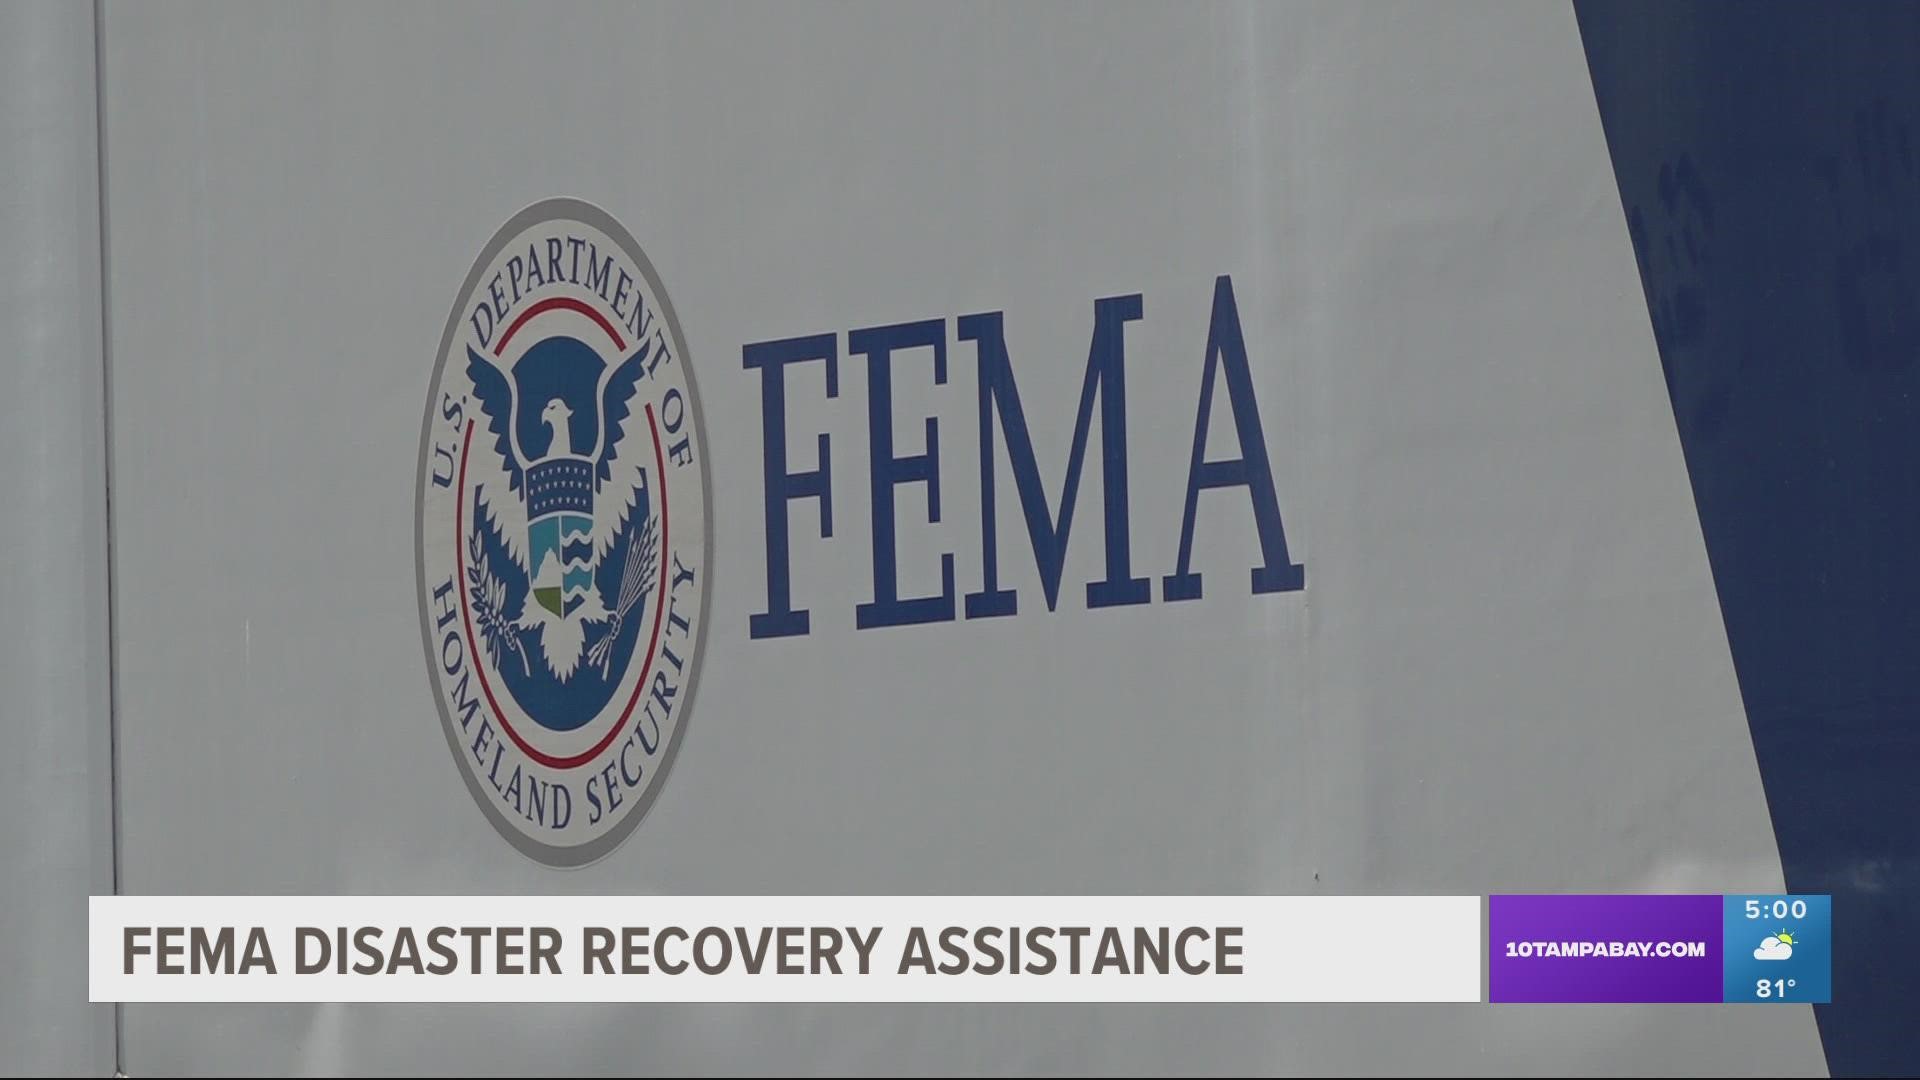 New disaster recovery centers are popping up weekly in the Tampa Bay area.